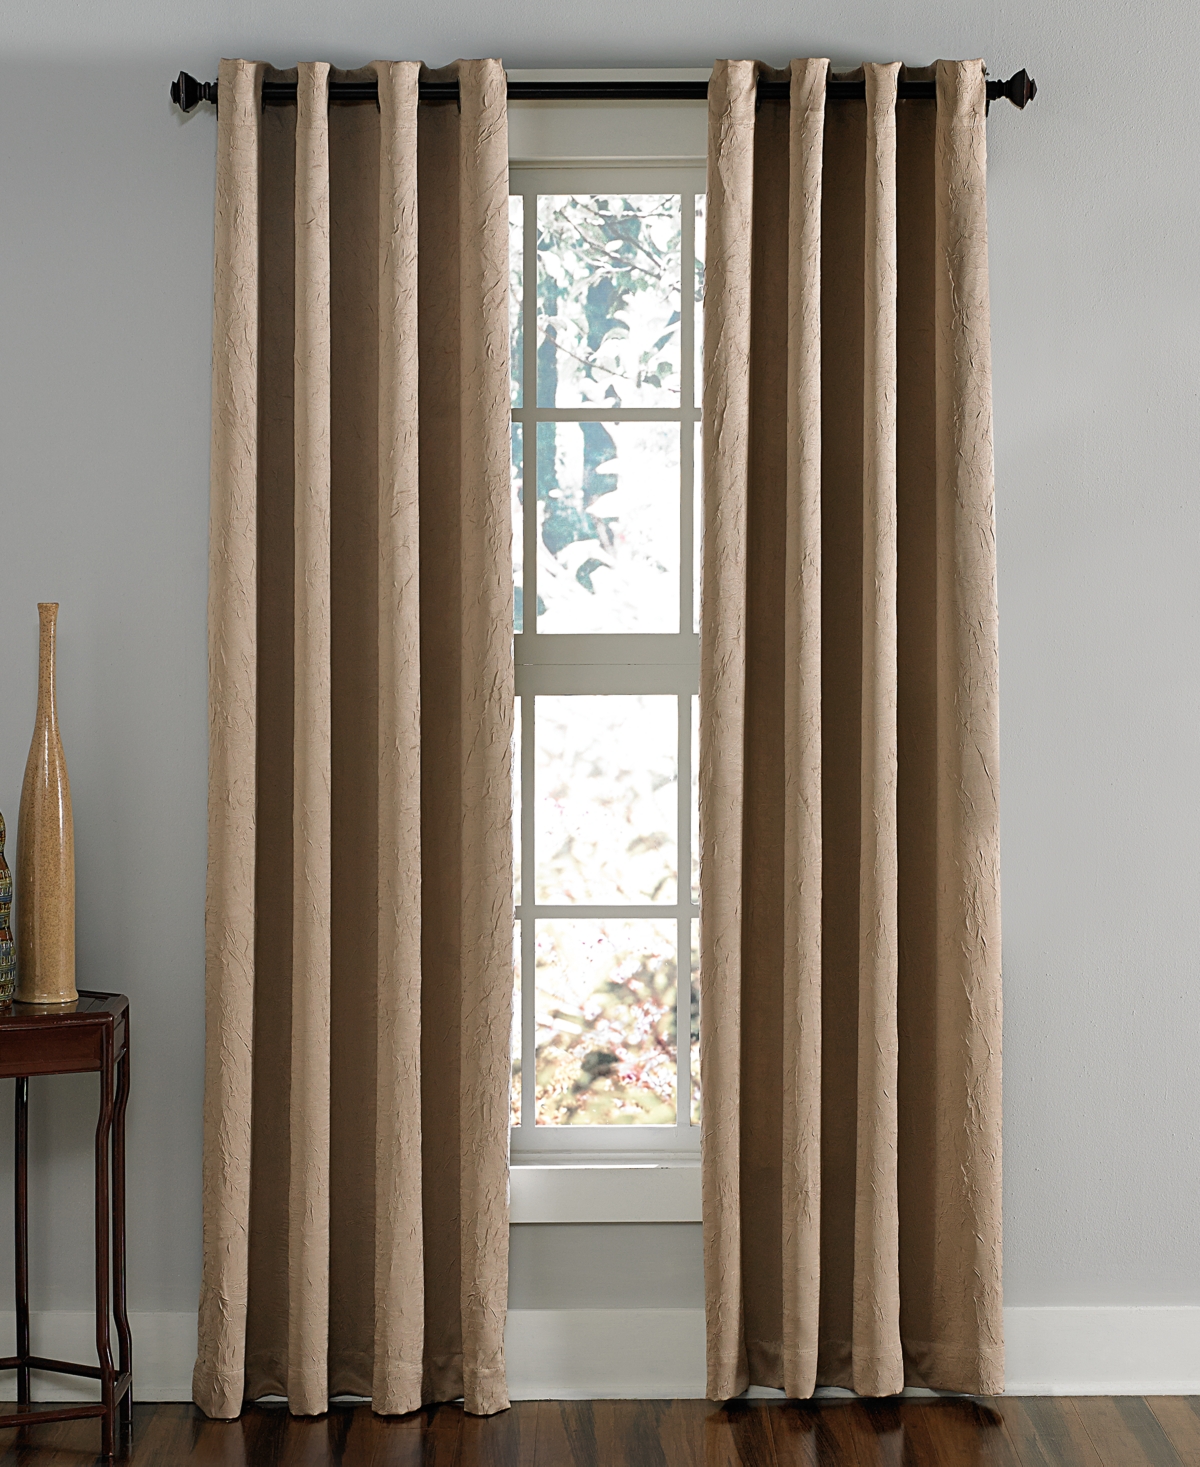 Lenox 50" x 120" Crushed Texture Curtain Panel - Taupe